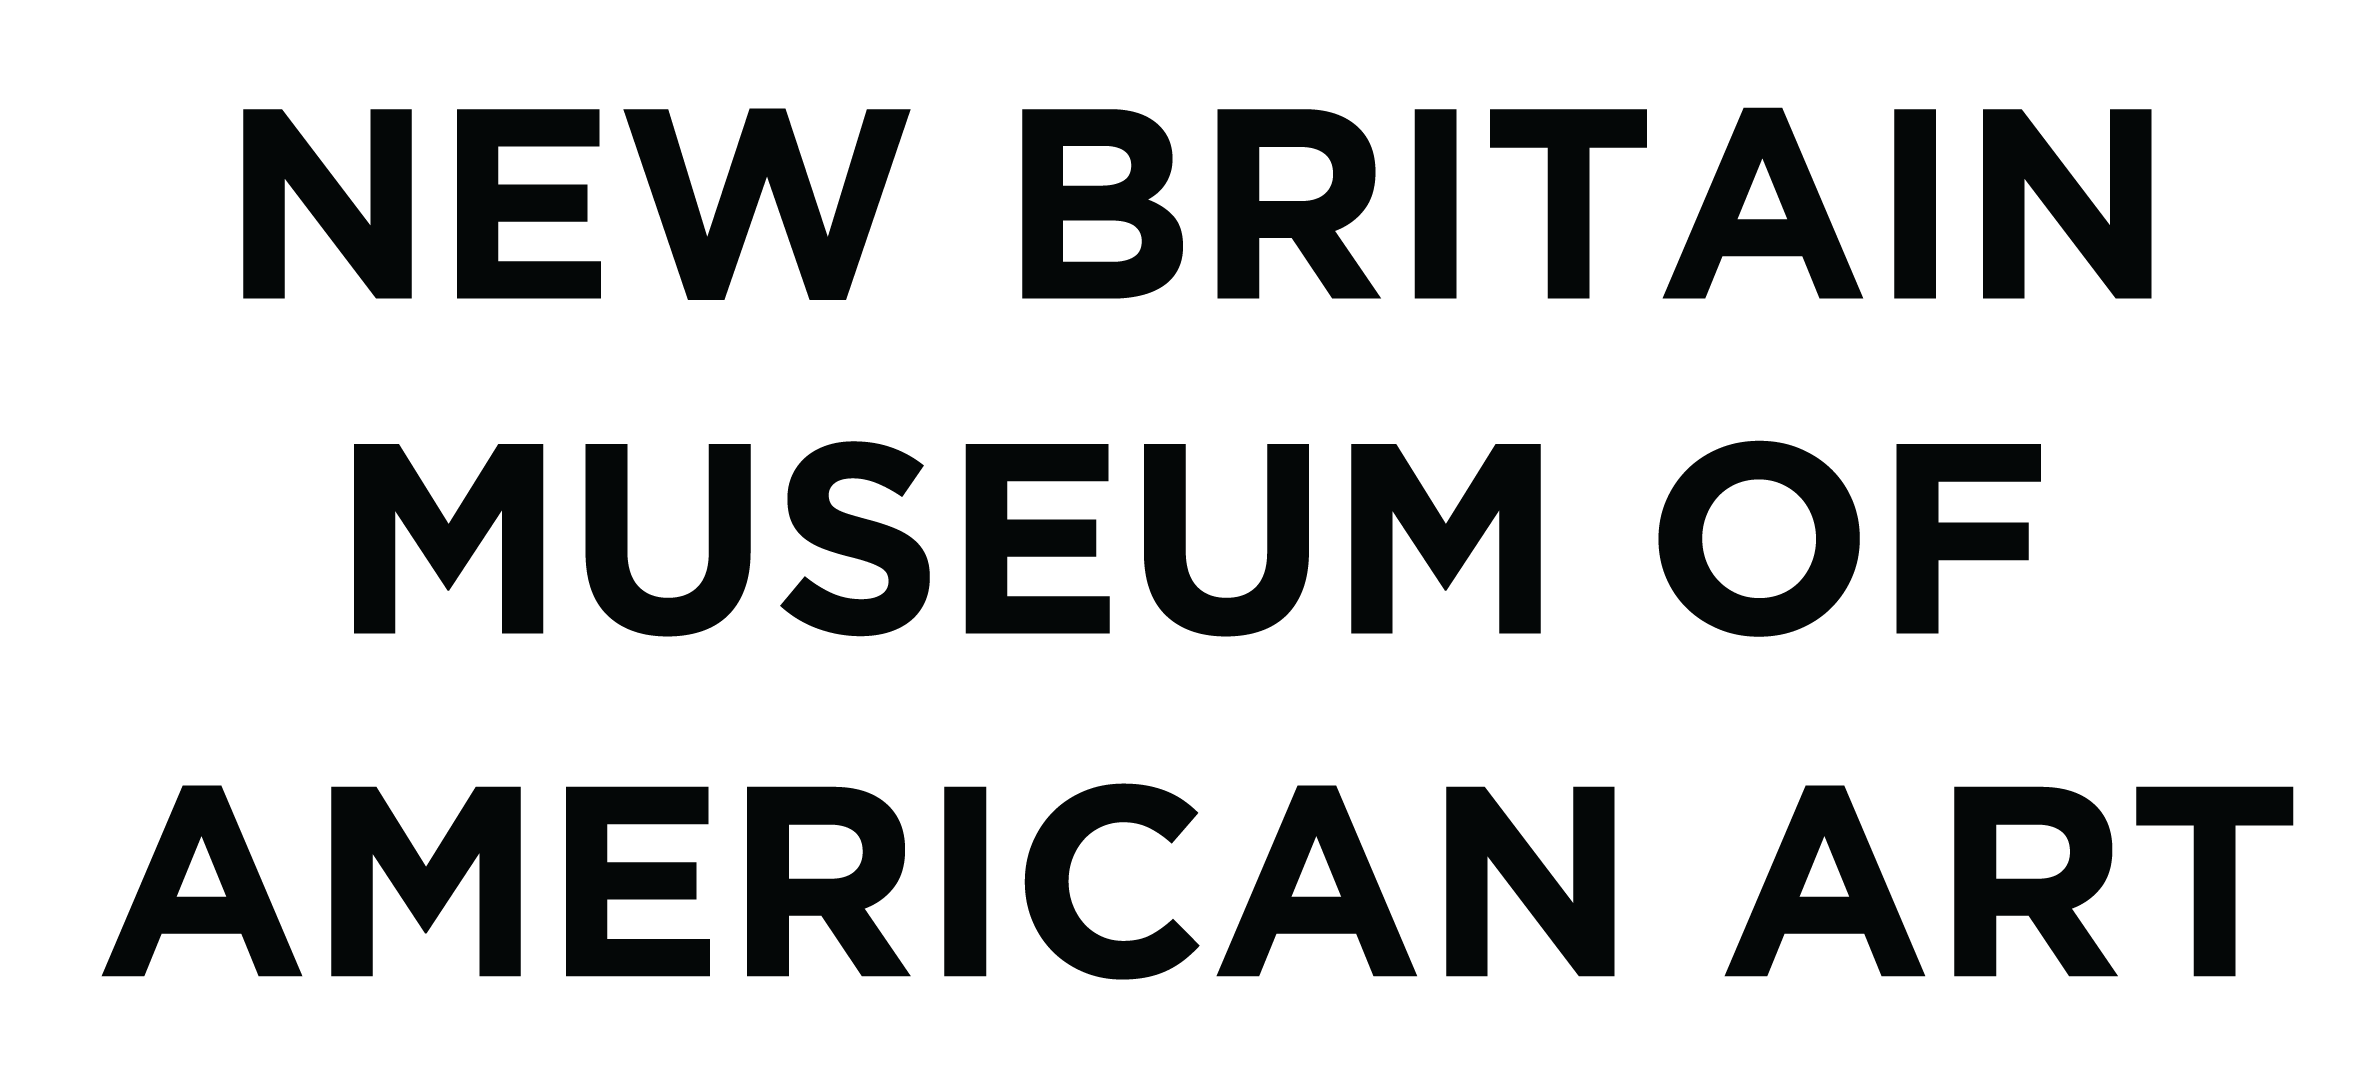 NBMAA_center_aligned-01.png